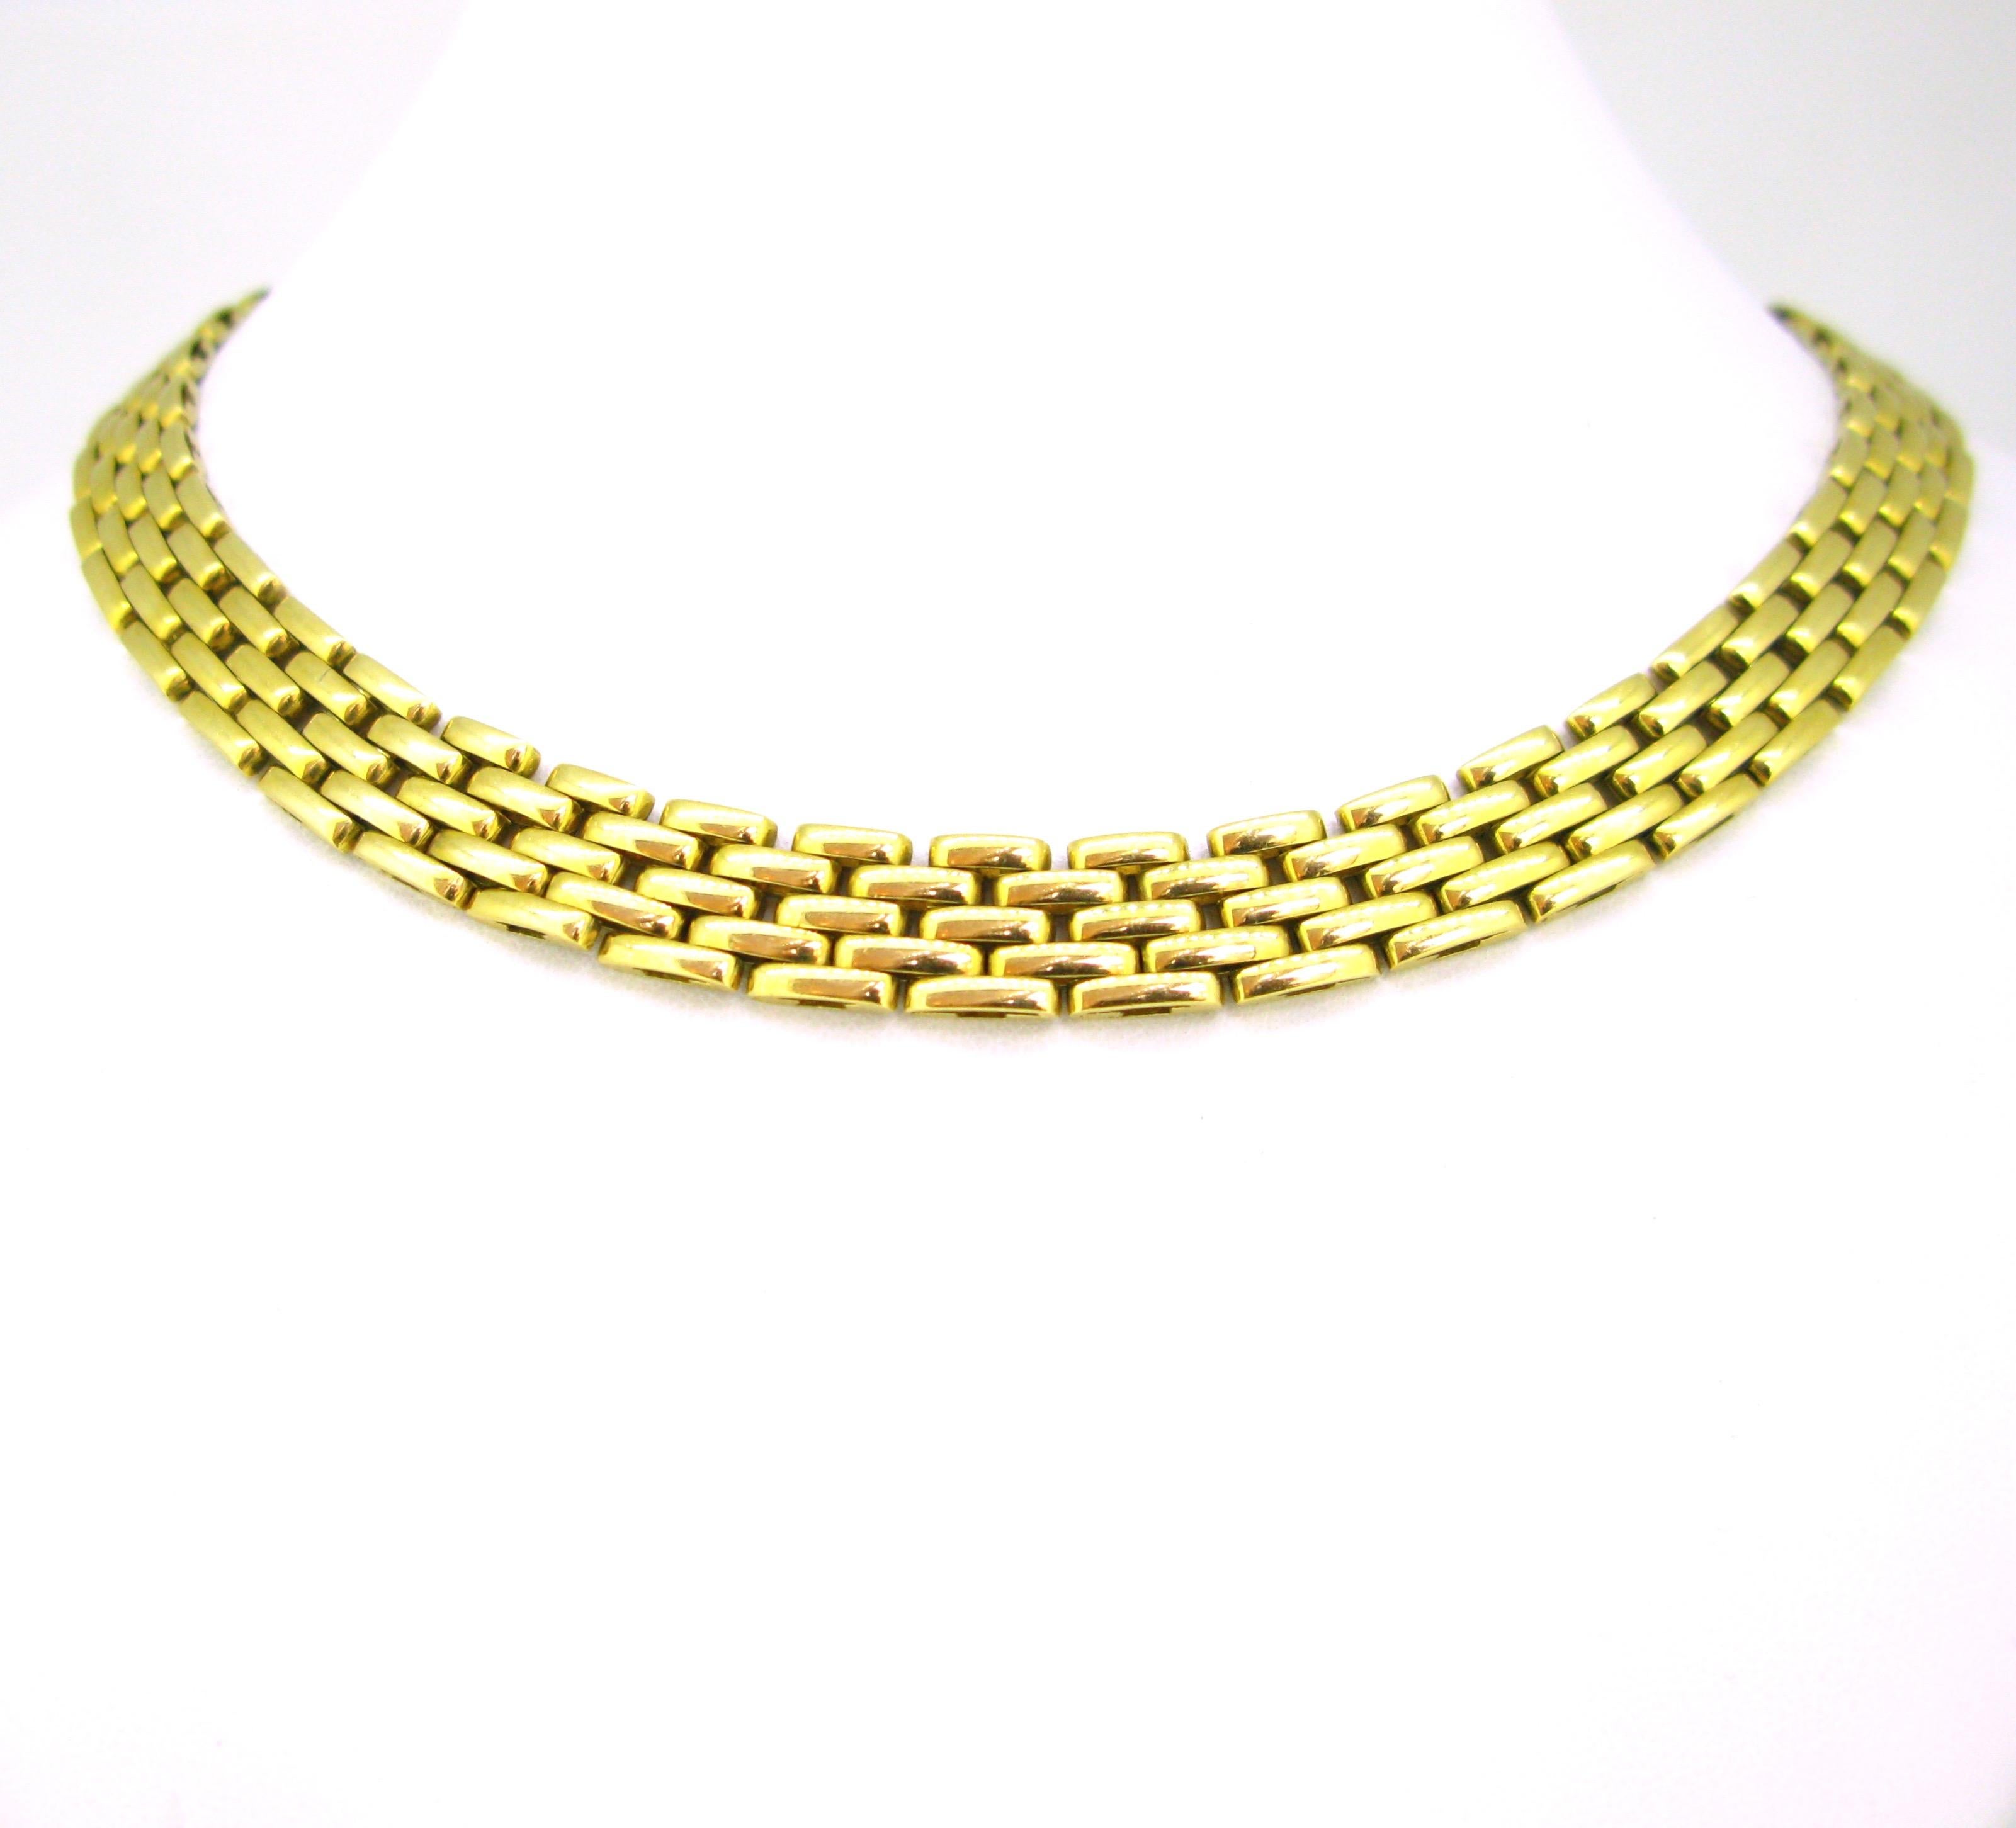 This vintage necklace is made by the French jeweller Mauboussin. It is made in 18kt yellow gold and this one has 5 rows links. The gold is smooth and shiny. It is very easy to wear every day. It weighs 77.3gr and is 41cm long. It is signed, numbered